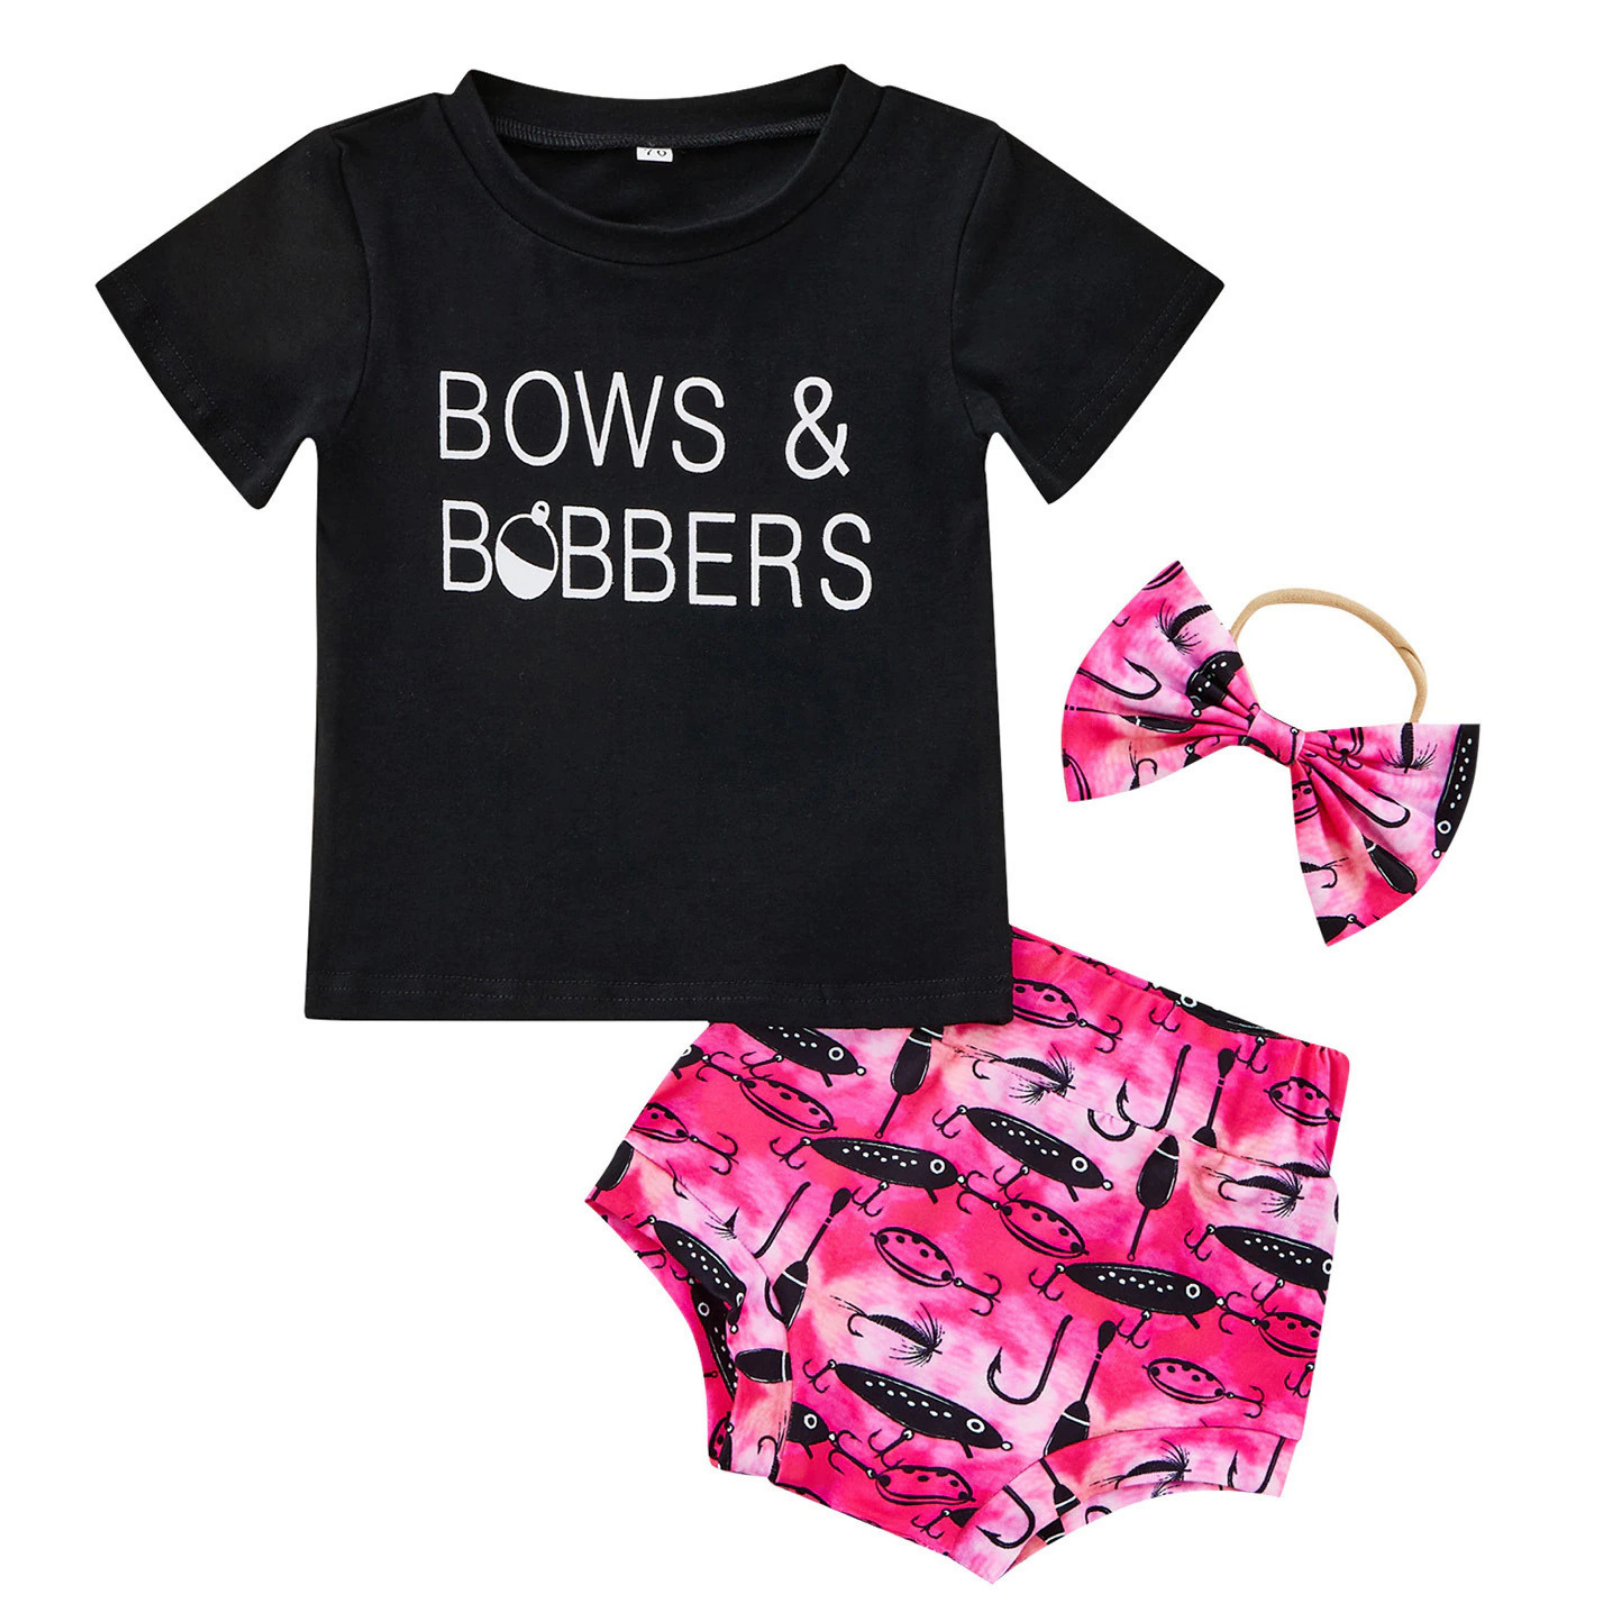 Bow's & Bobbers Tee & Bloomers Set